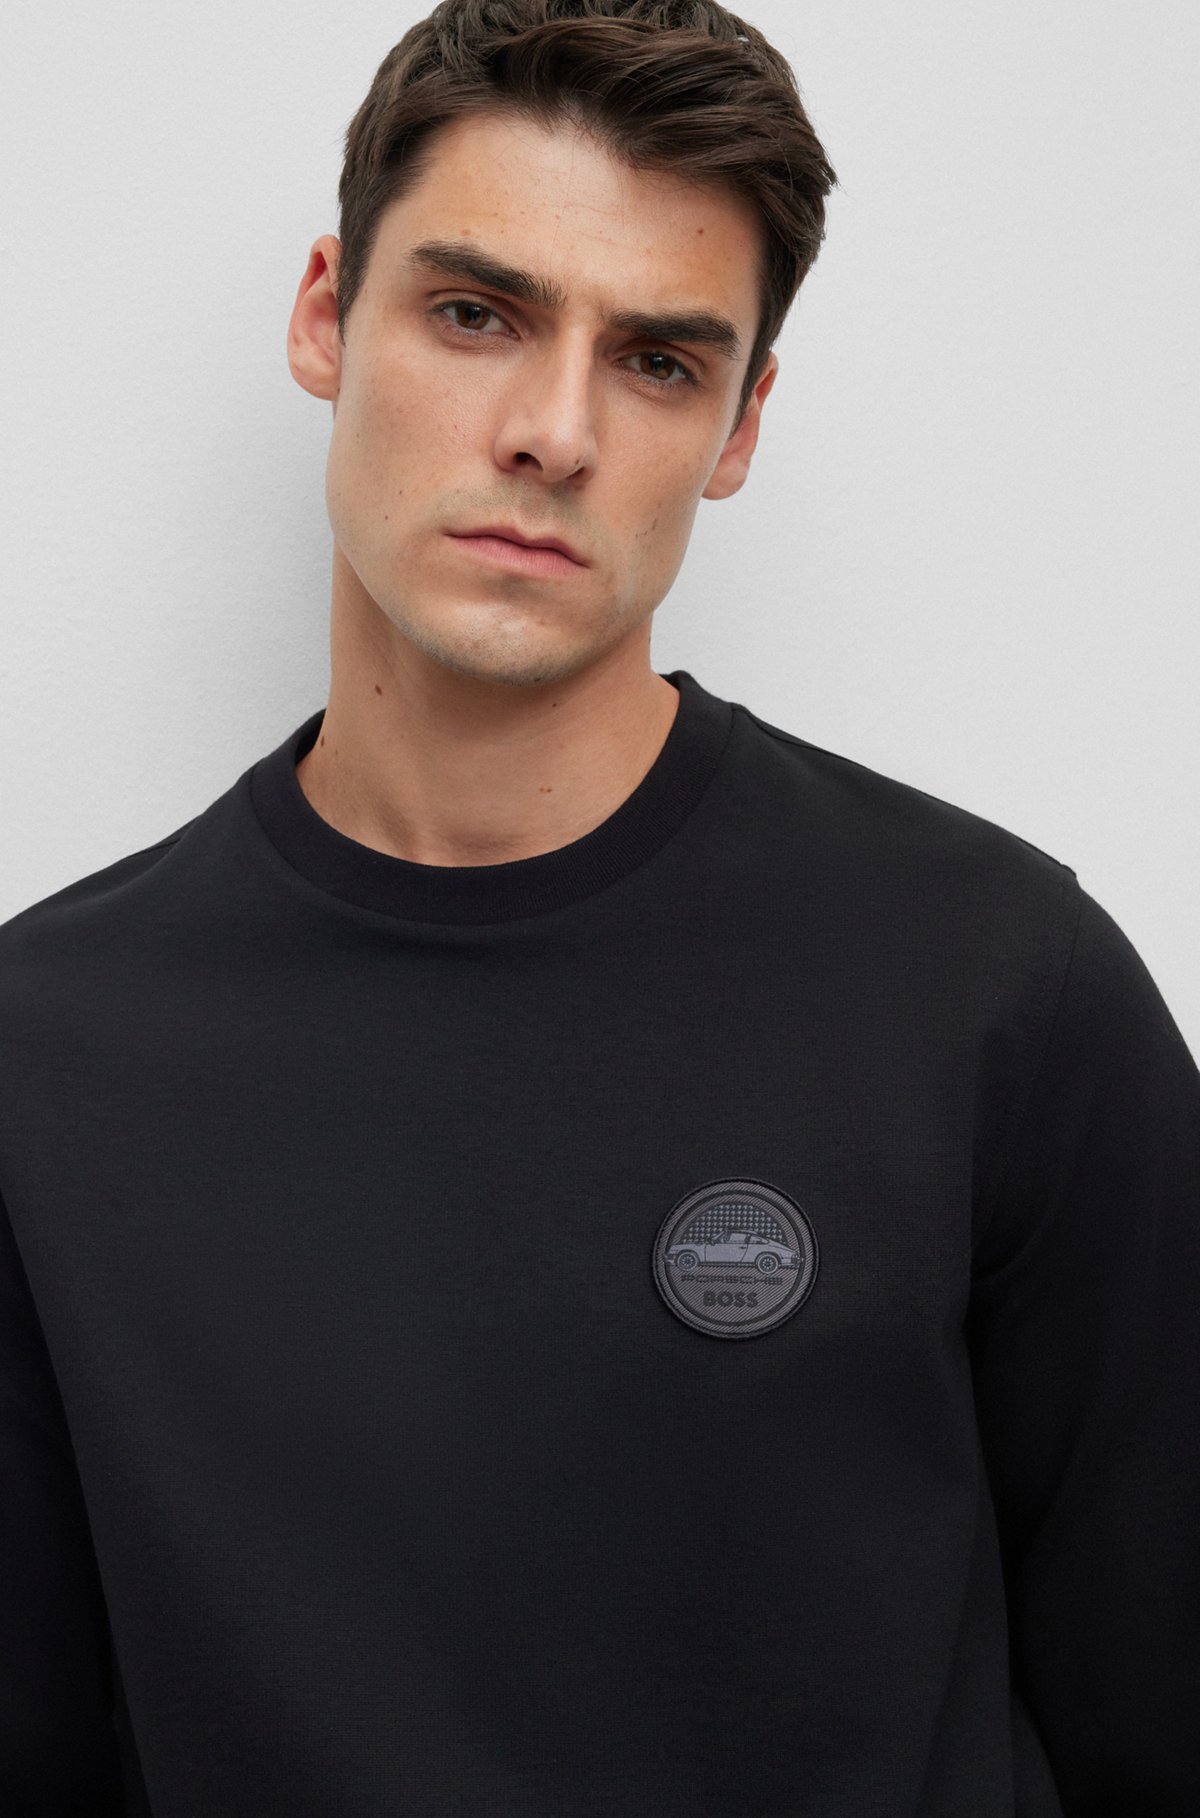 Porsche x BOSS relaxed-fit sweatshirt with capsule patch, Black